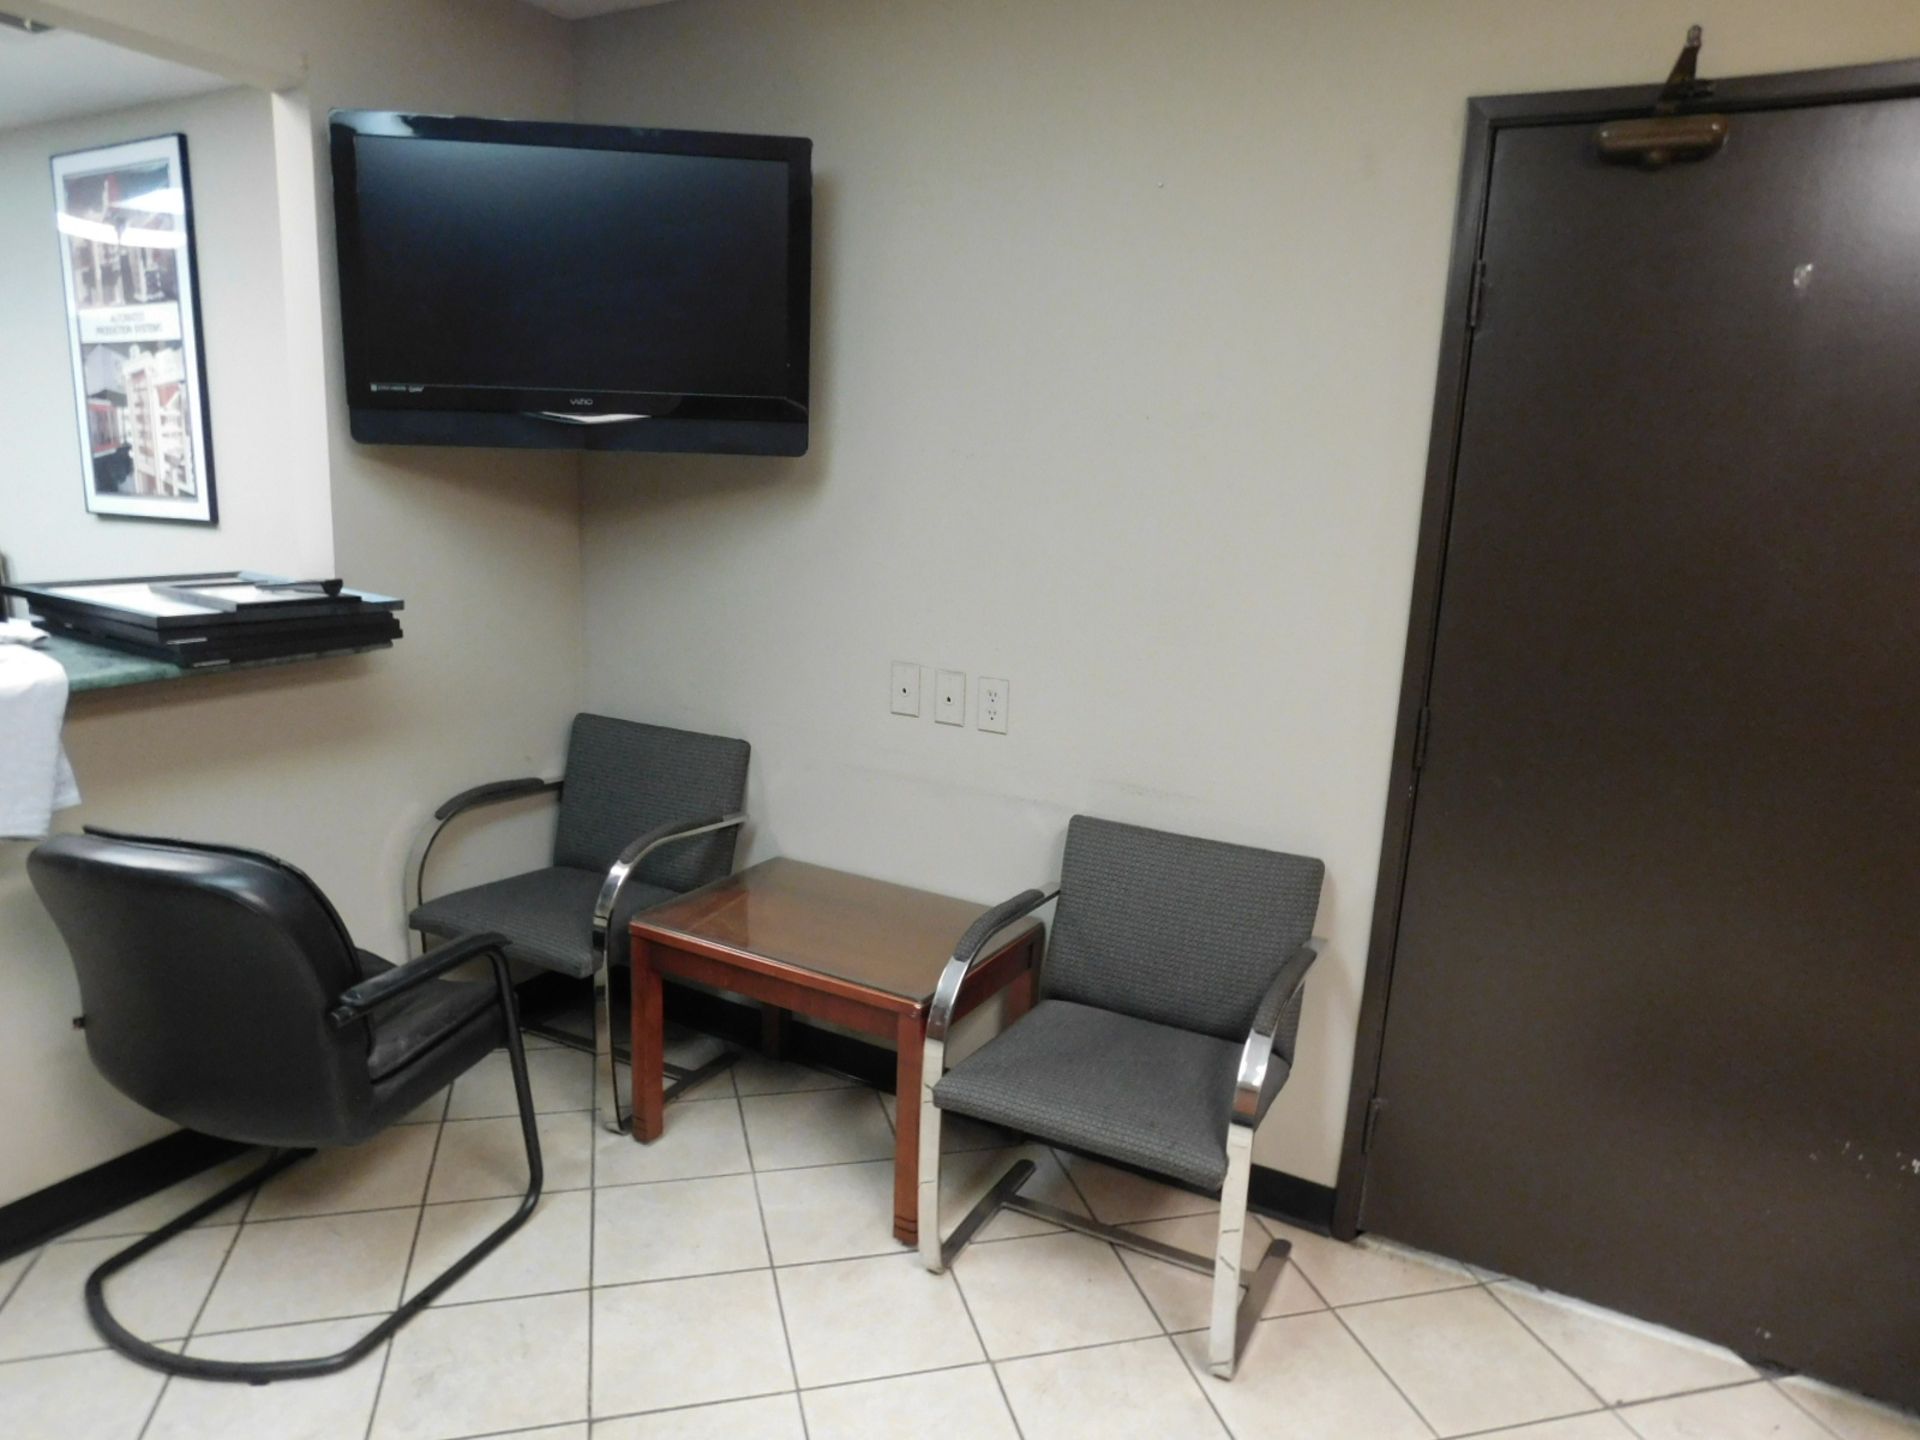 LOT - CONTENTS OF RECEPTION AREA: FURNISHINGS AND VIZIO 37" LCD TV, ETC. - Image 3 of 5